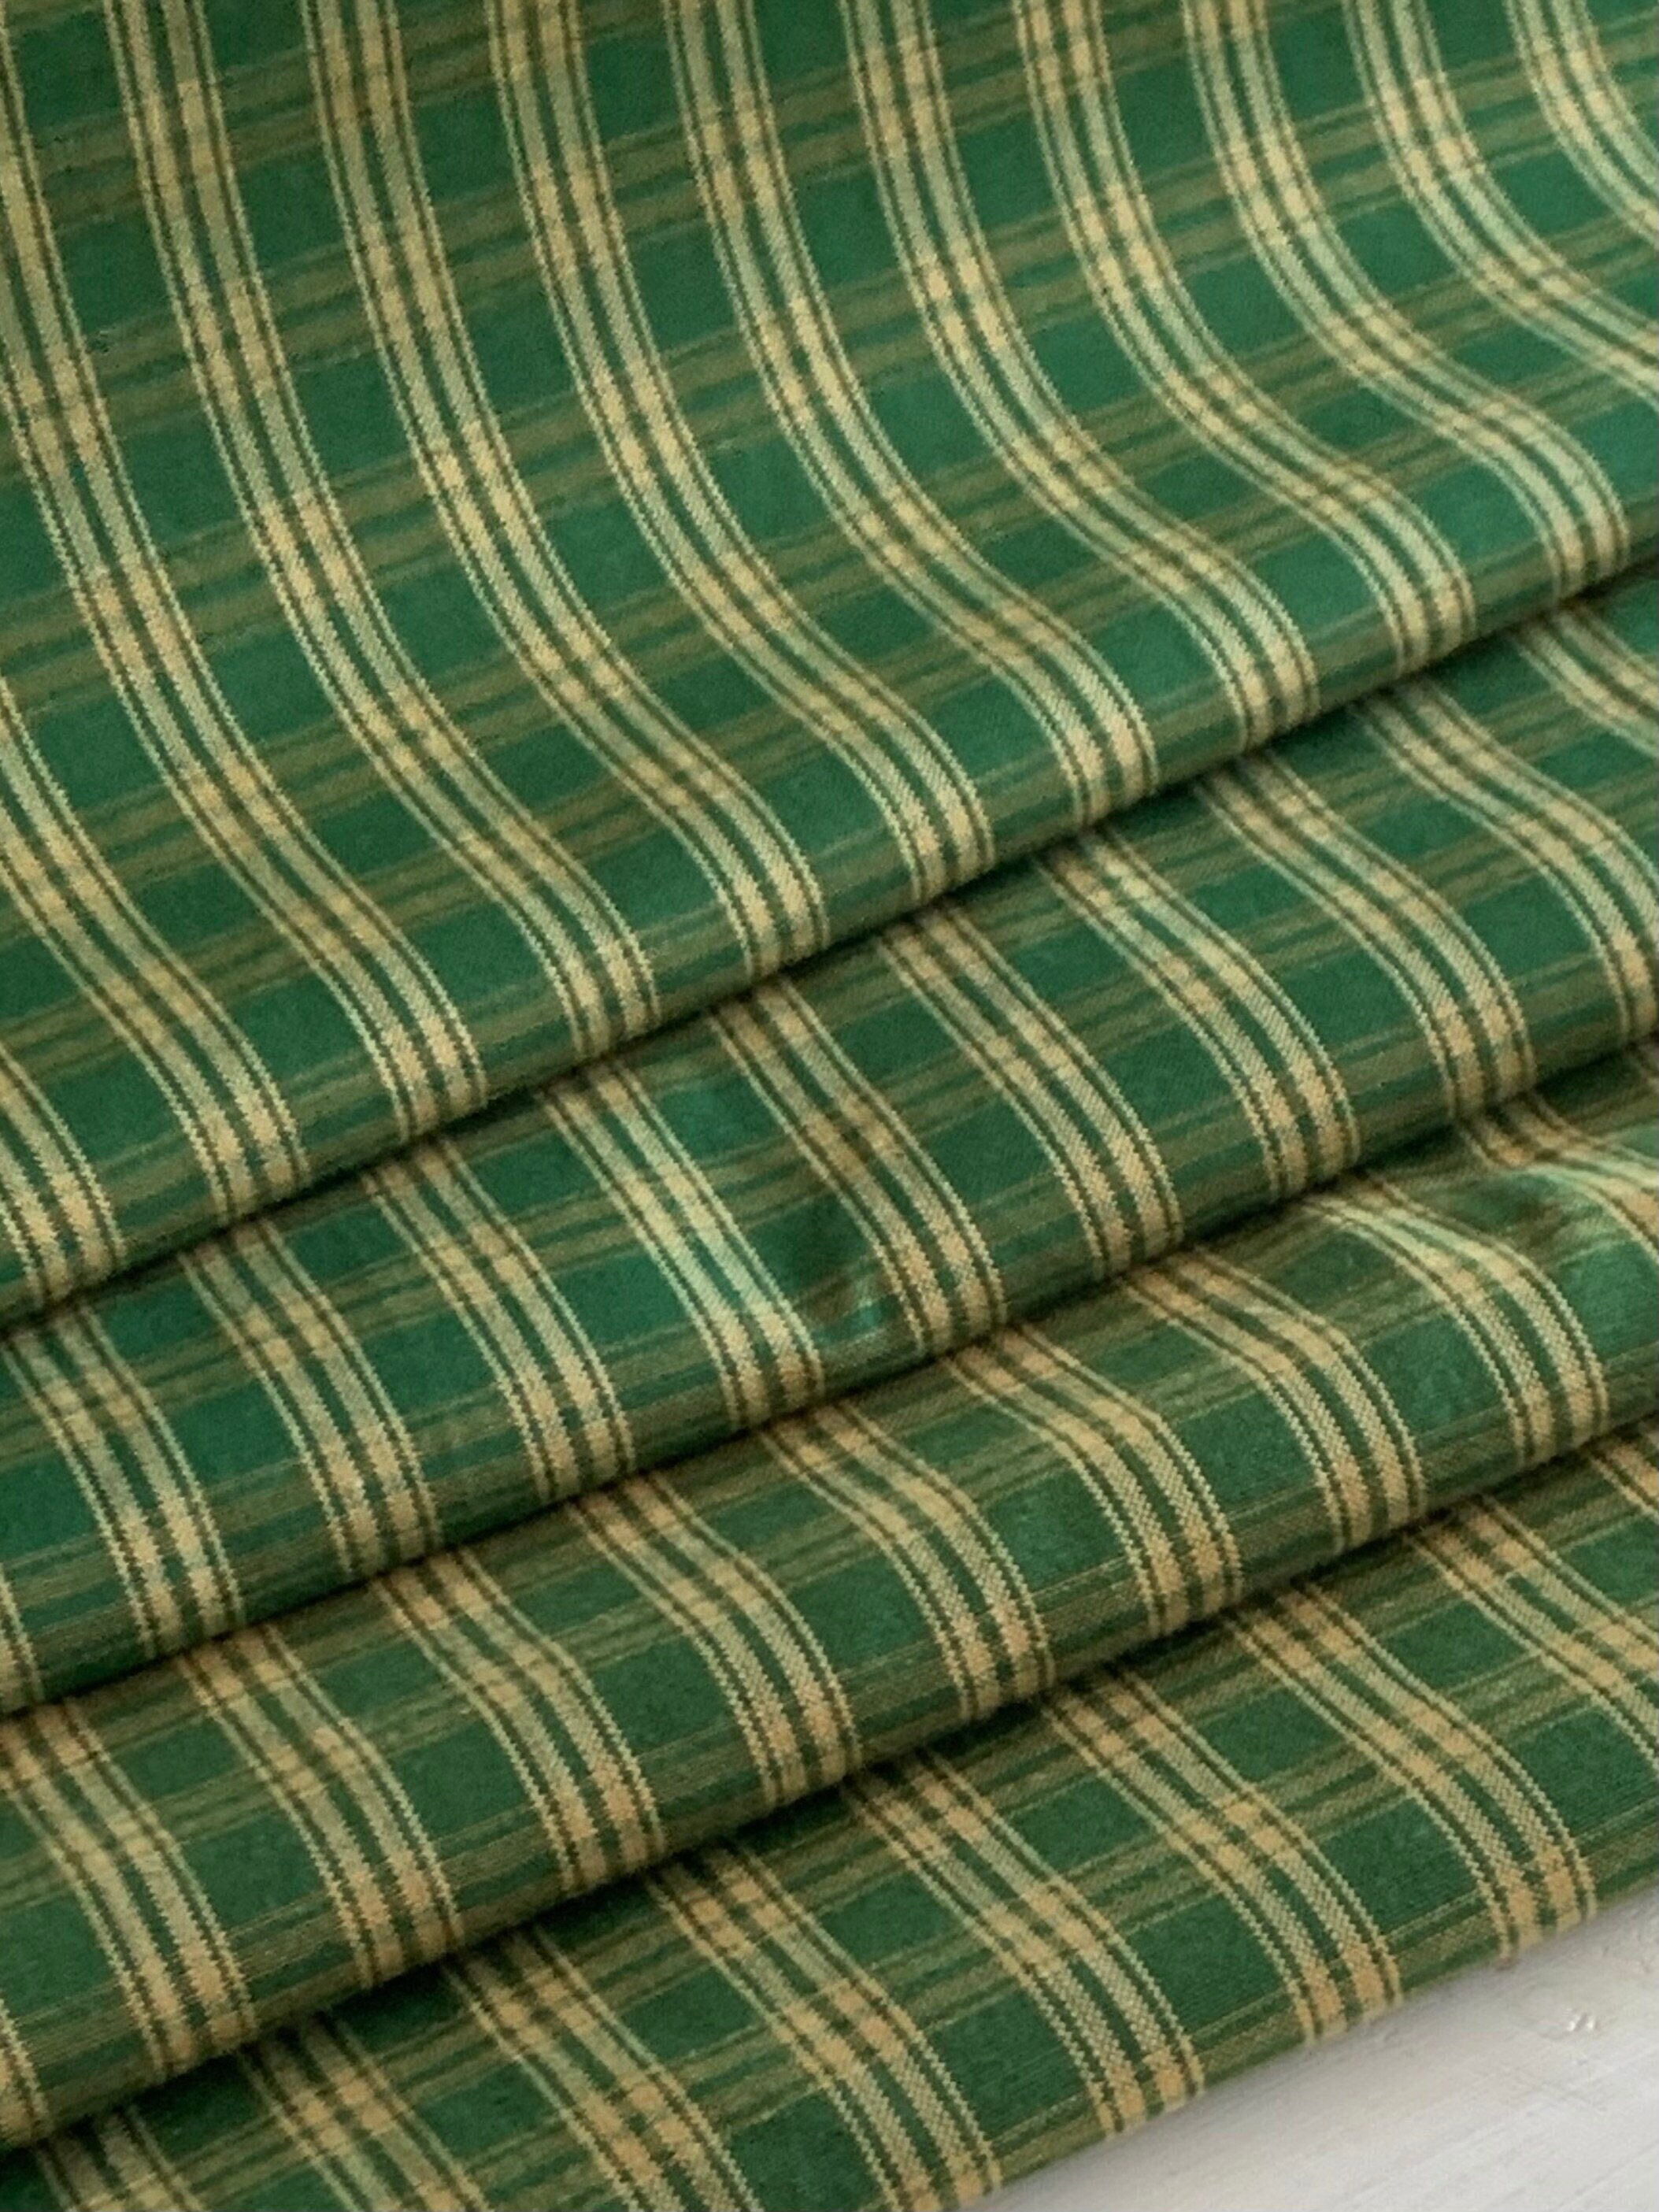 Homespun Green and Beige Plaid Fabric Woven Doubled Sided image image